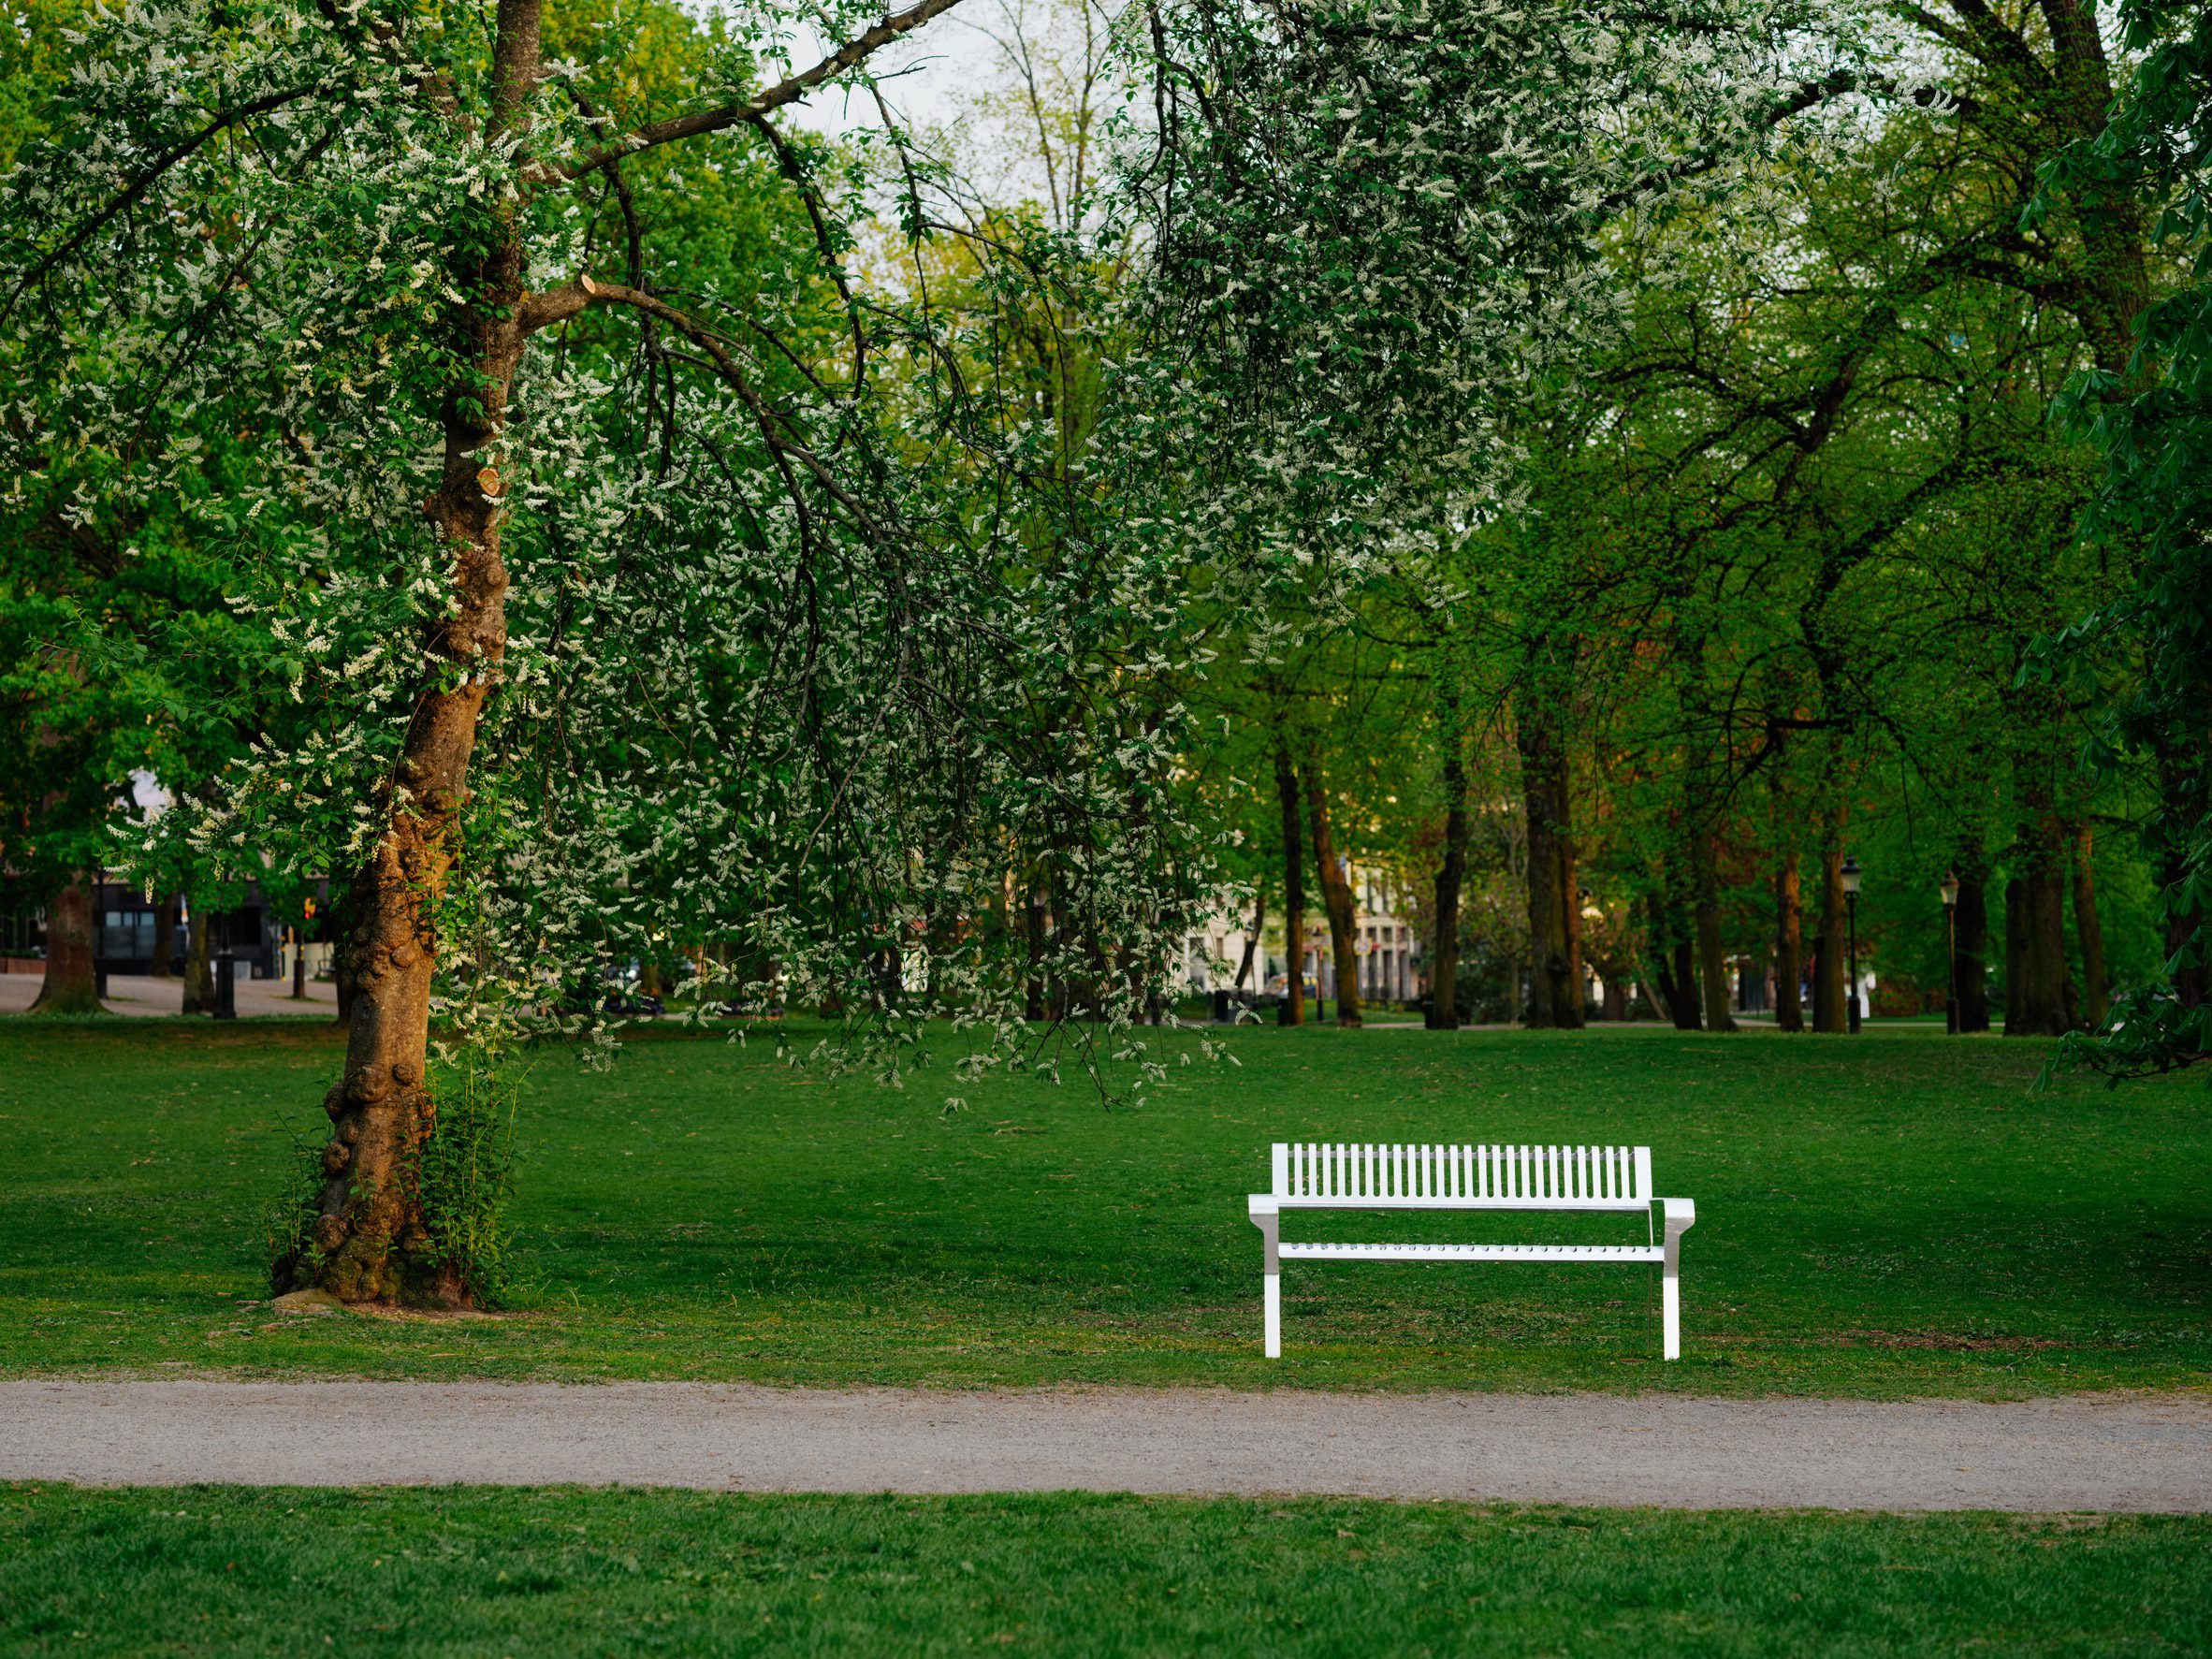 Photo of the Tellus steel bench in a lush, green public park